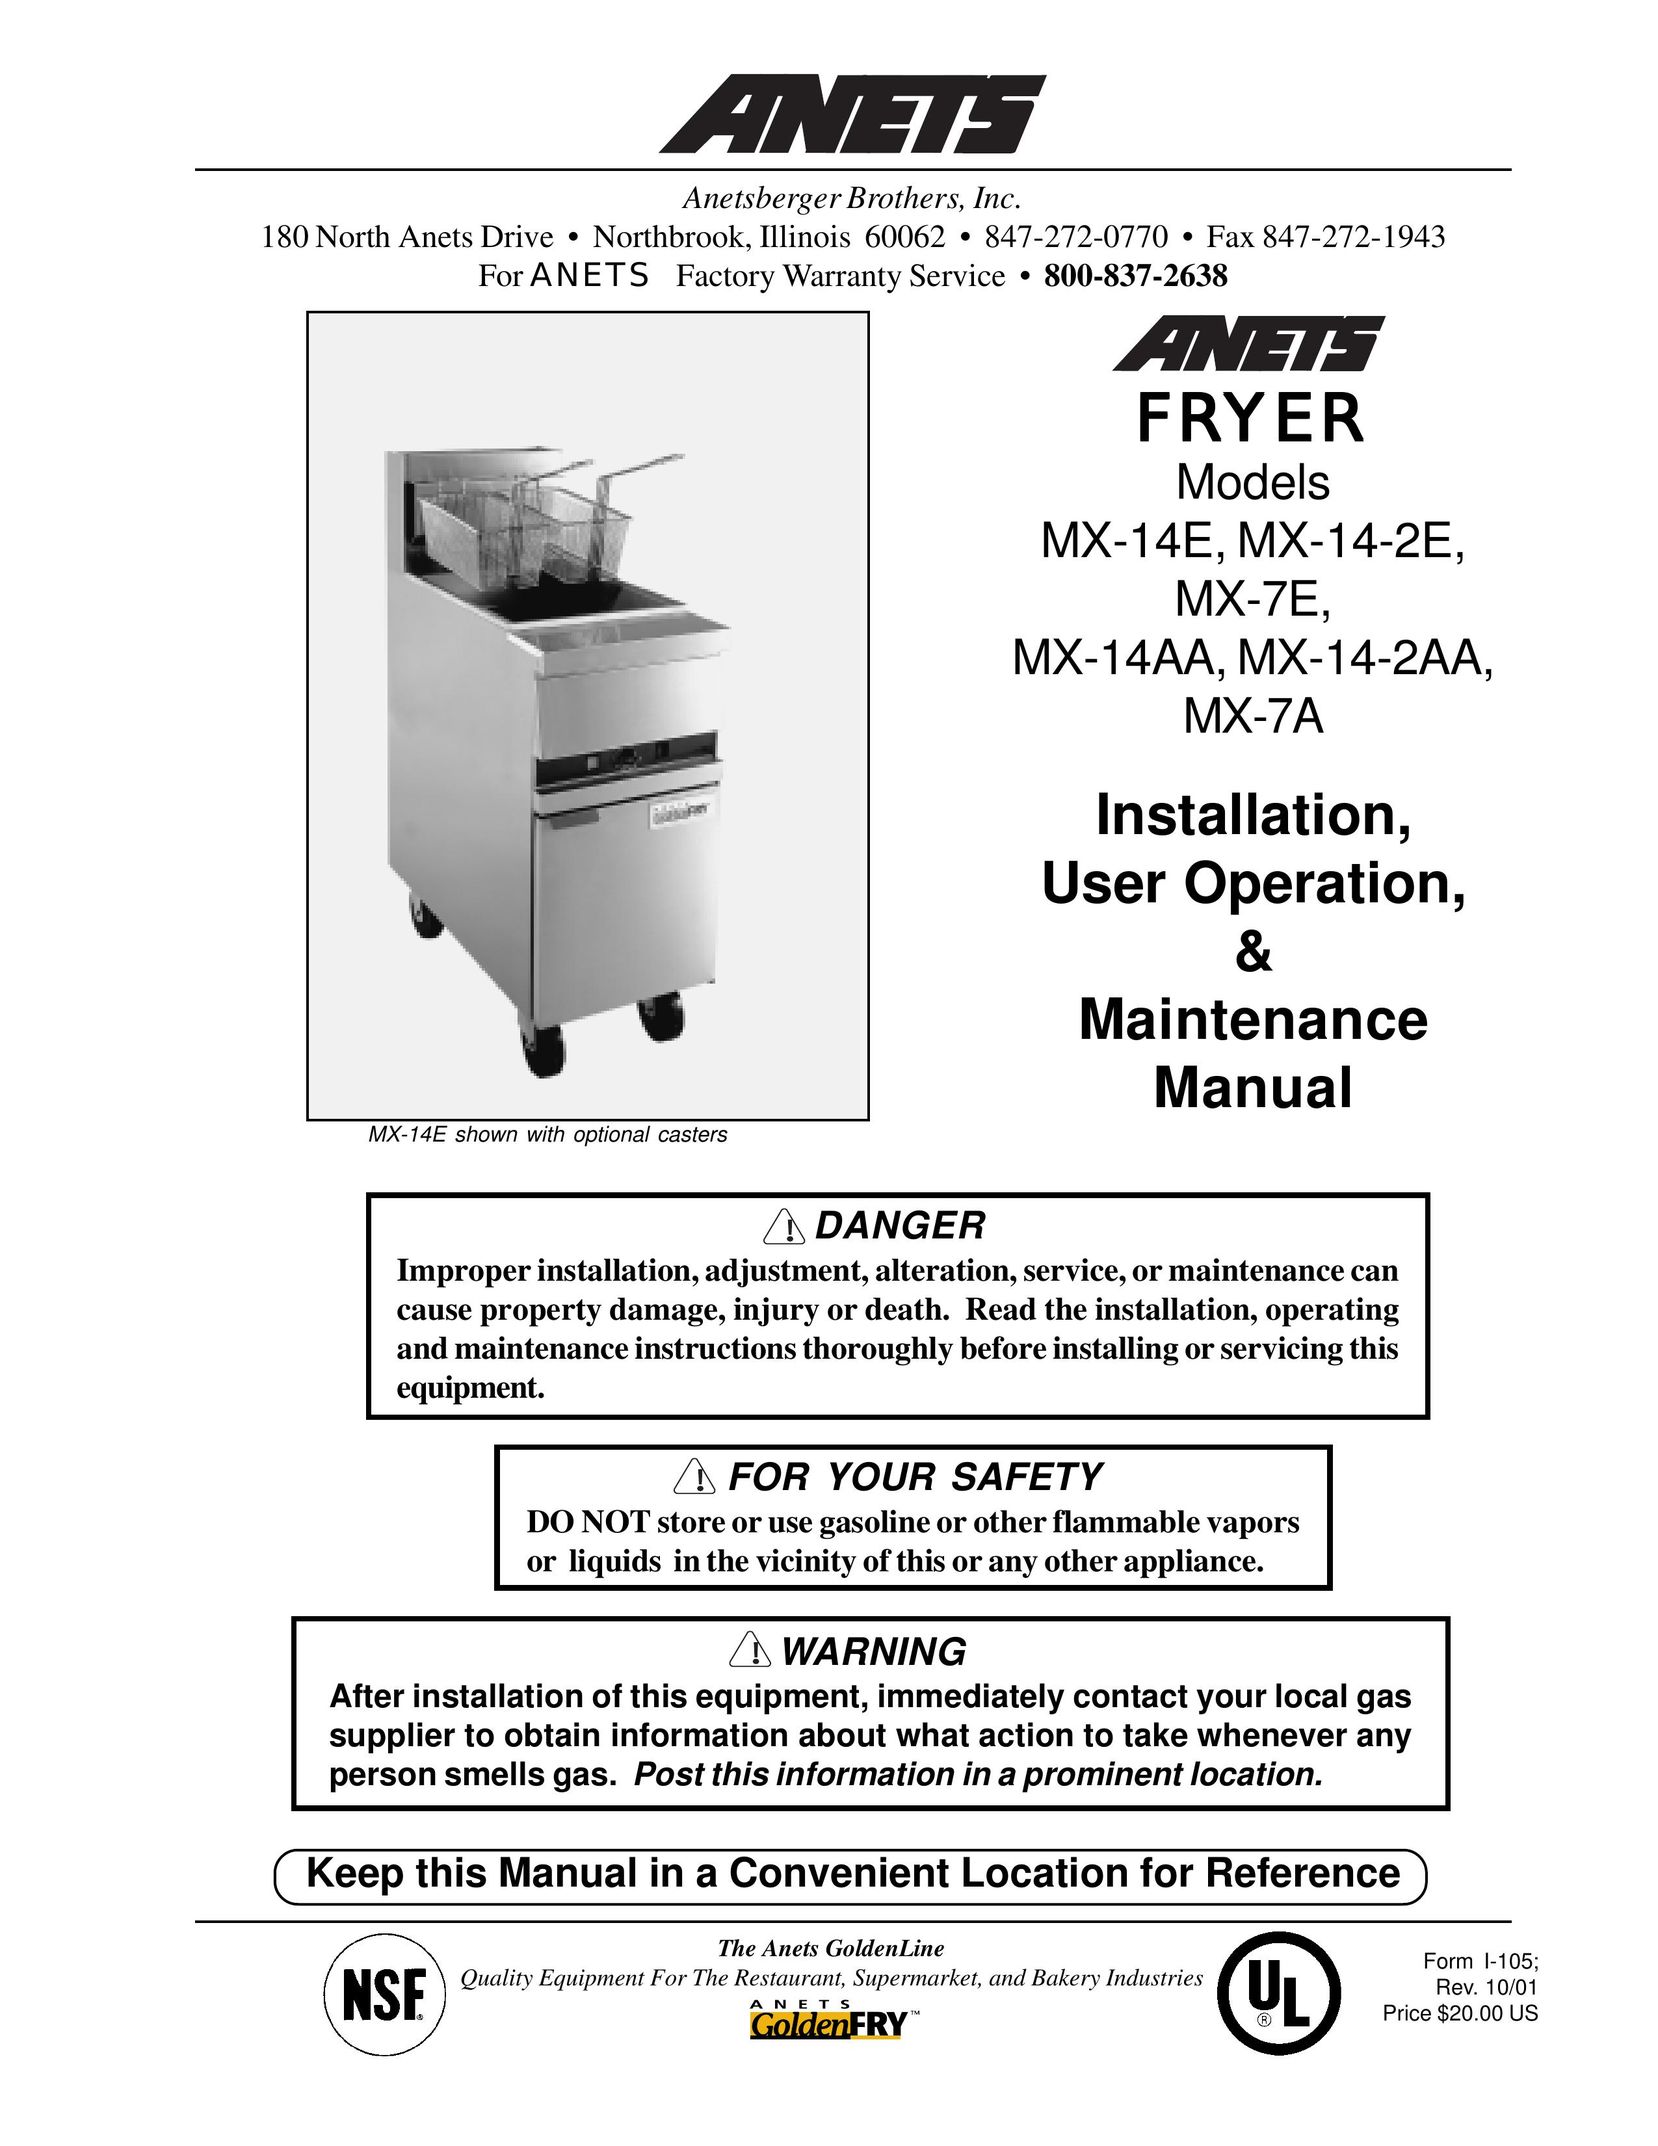 Anetsberger Brothers MX-7E Fryer User Manual